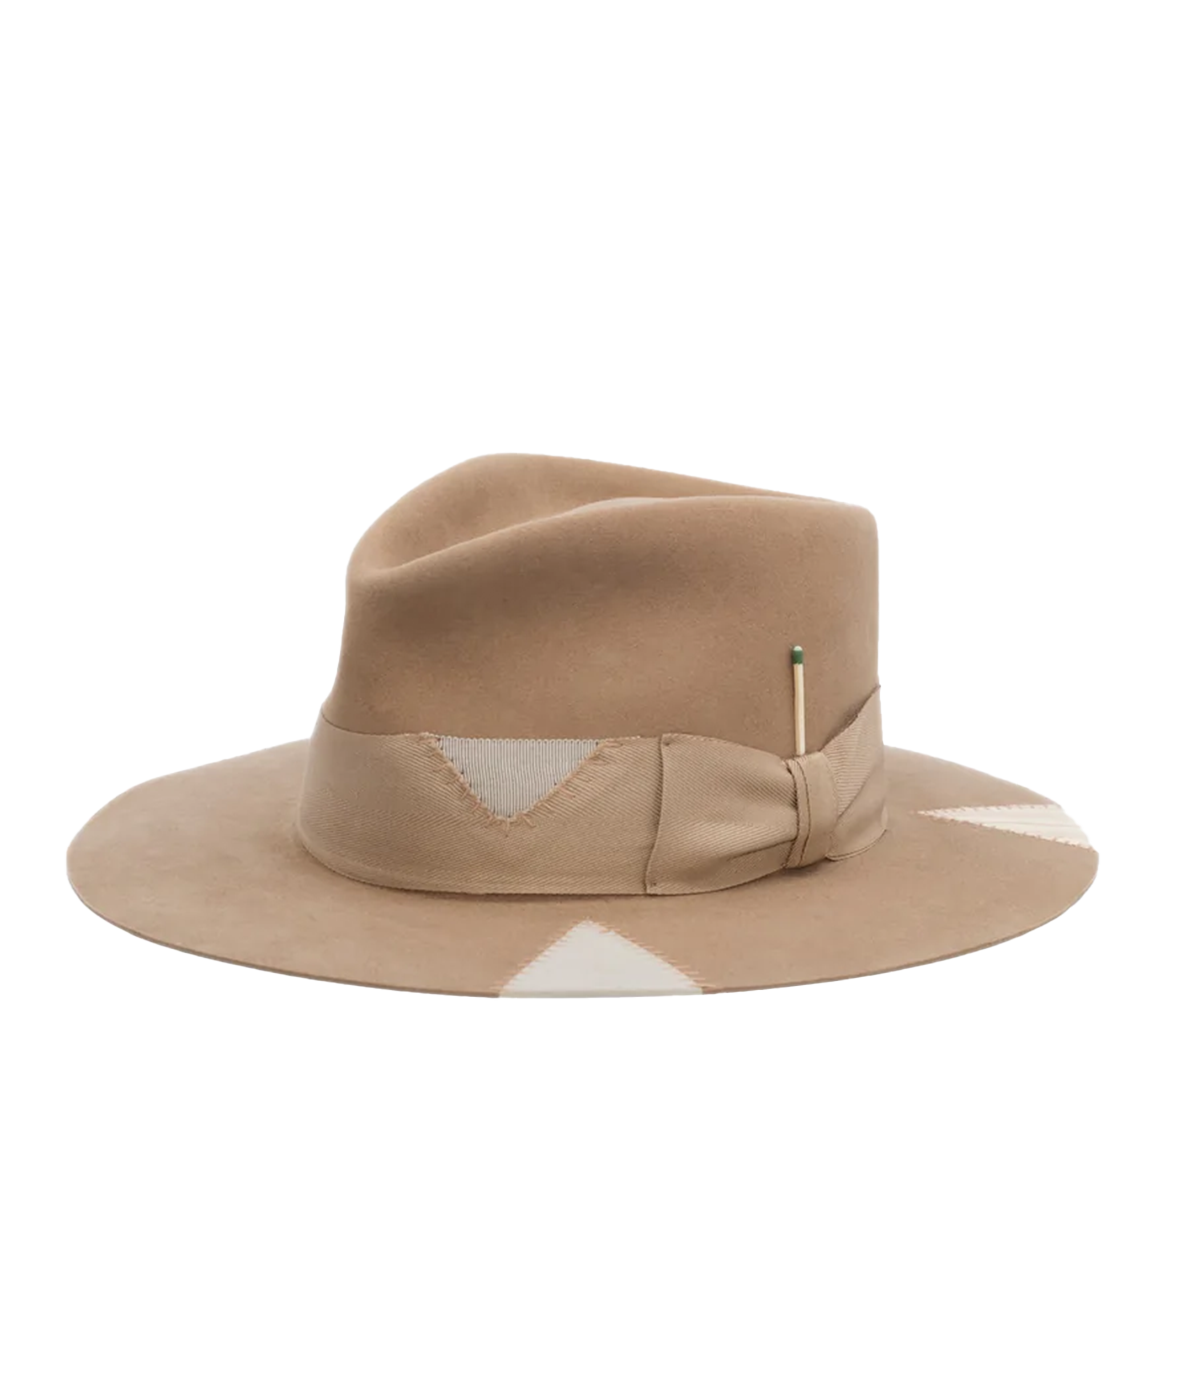 Image of a western style beige 100% felt hat. Featuring 3 triangle cutouts, frankenstein stitching, a flat brim and signature Nick Fouquet Match. 